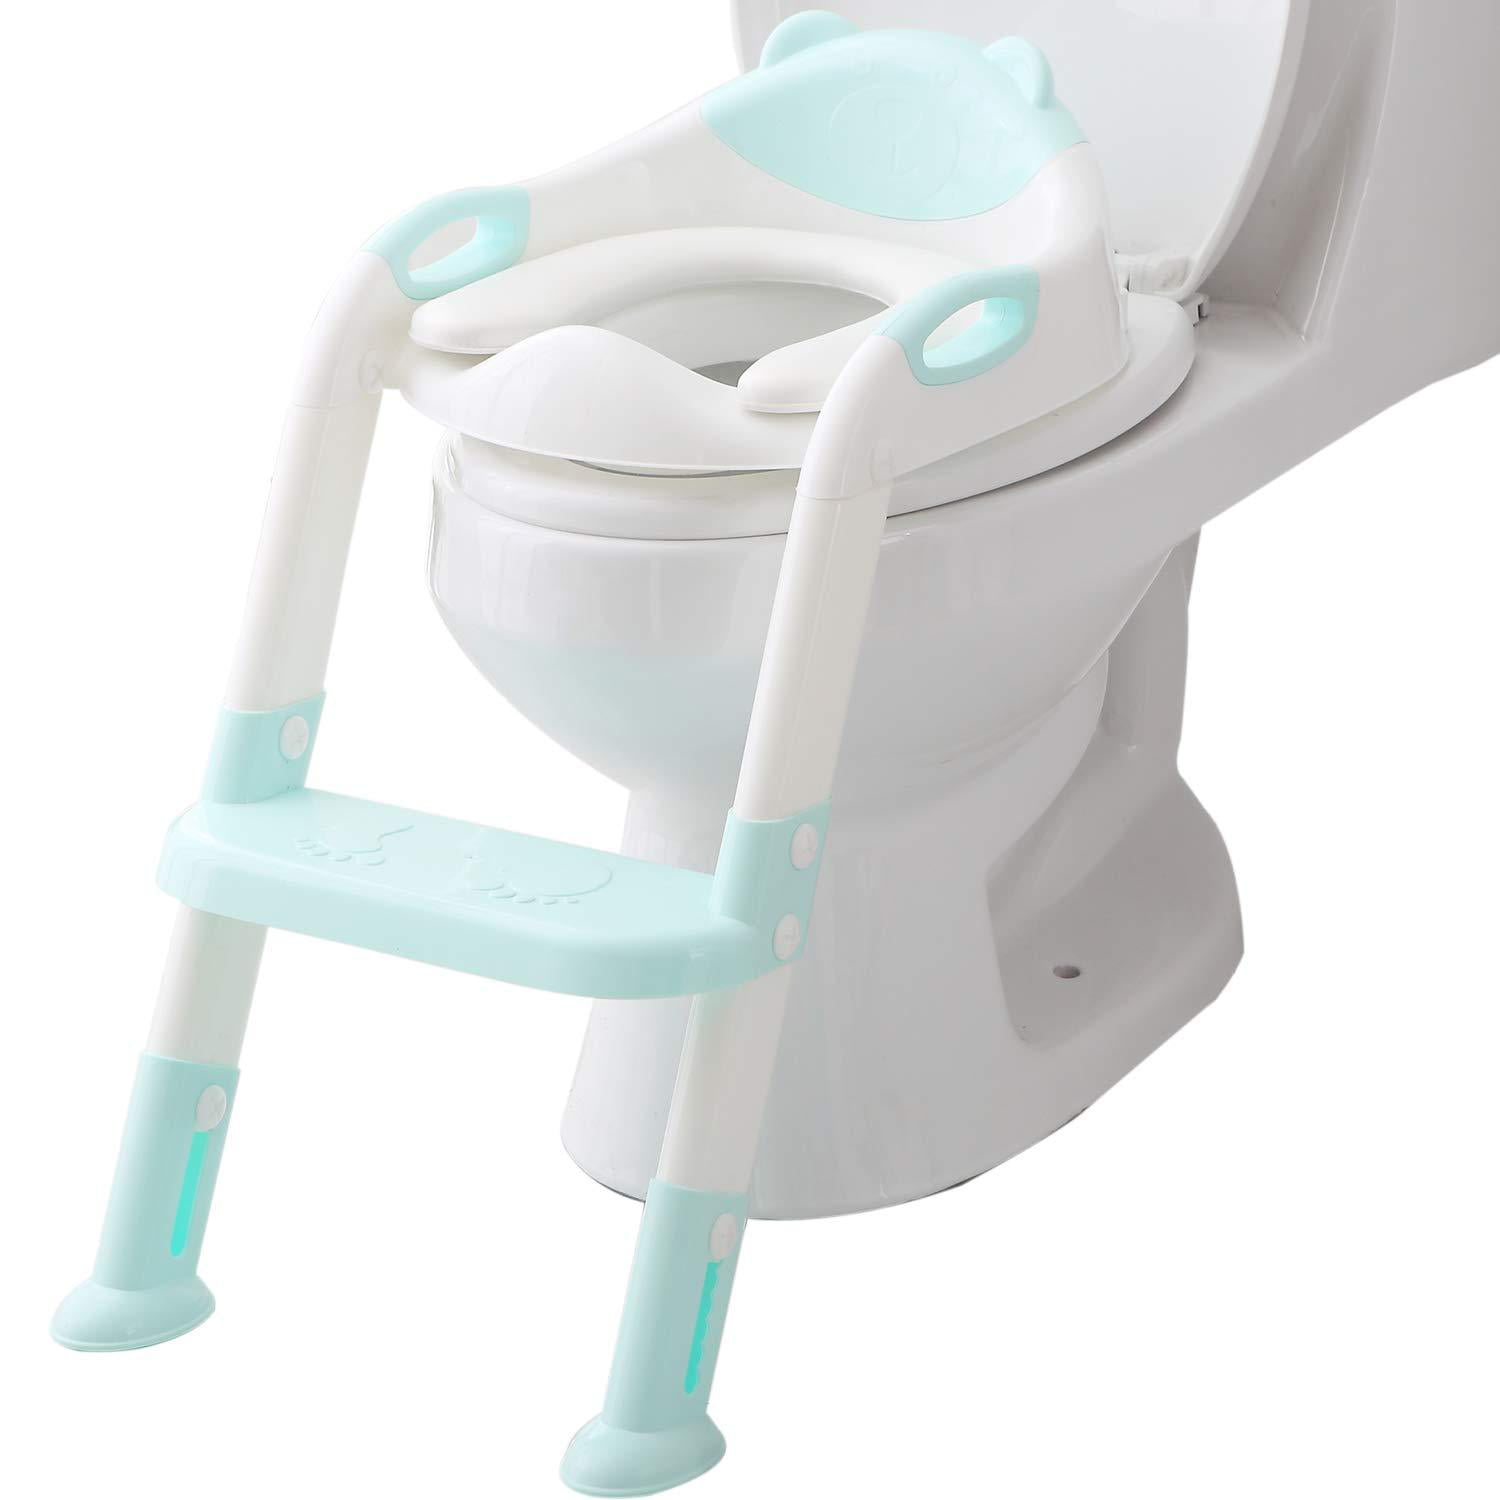 Toilet Seat Potty For Toddlers - the most toilet